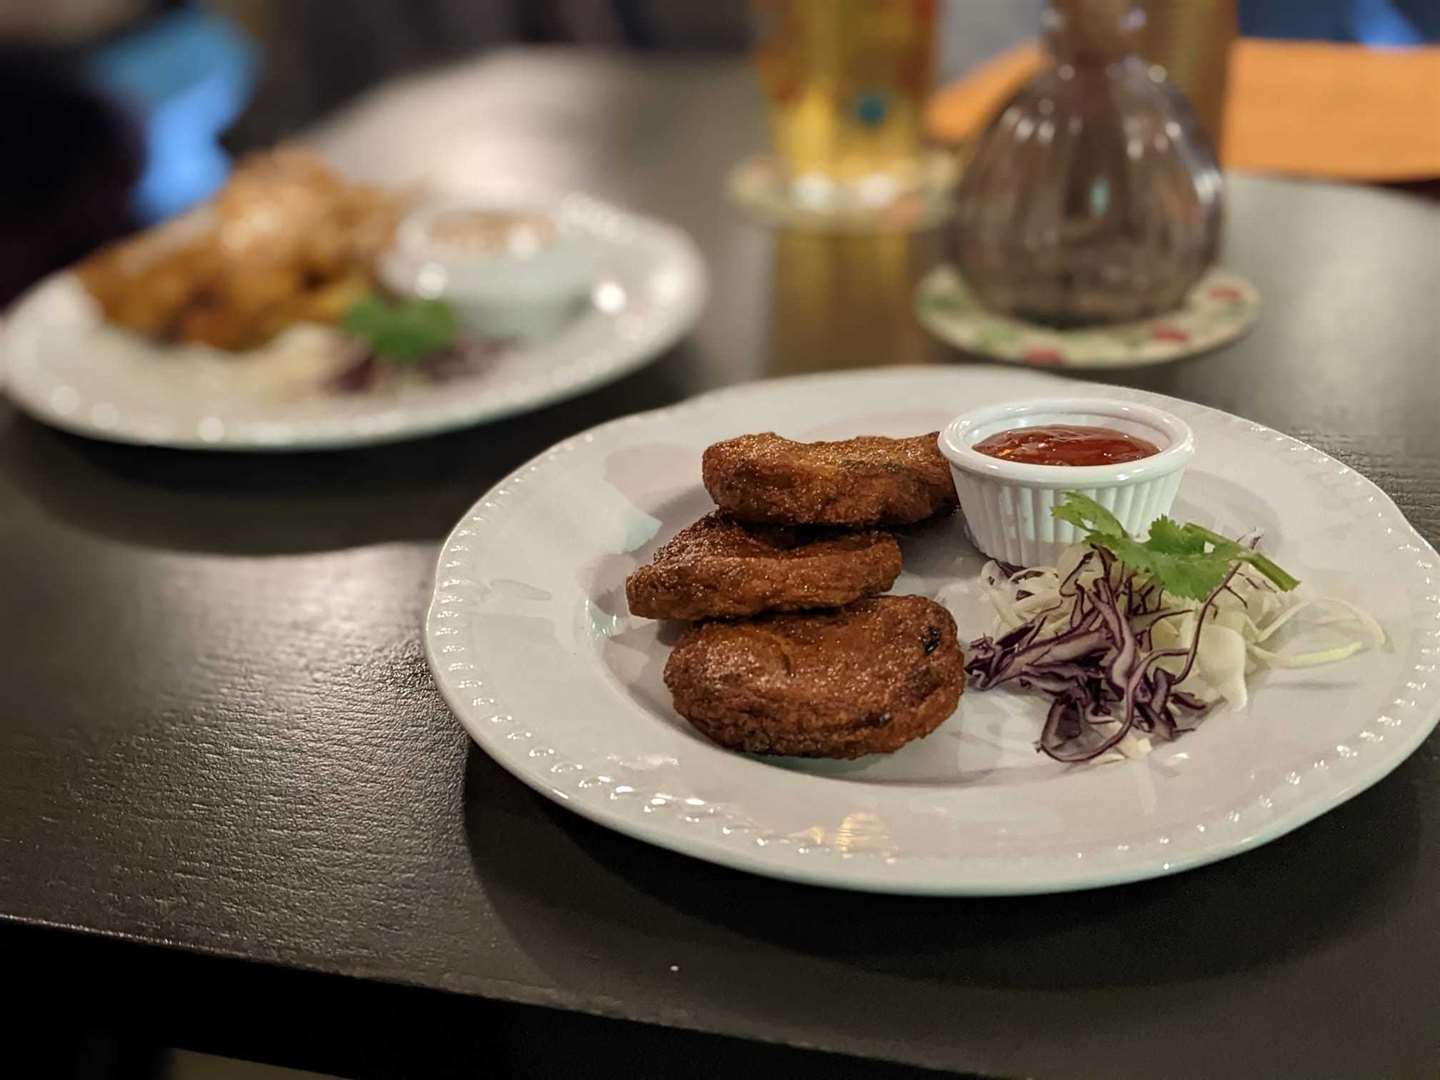 The fish cakes, also £5